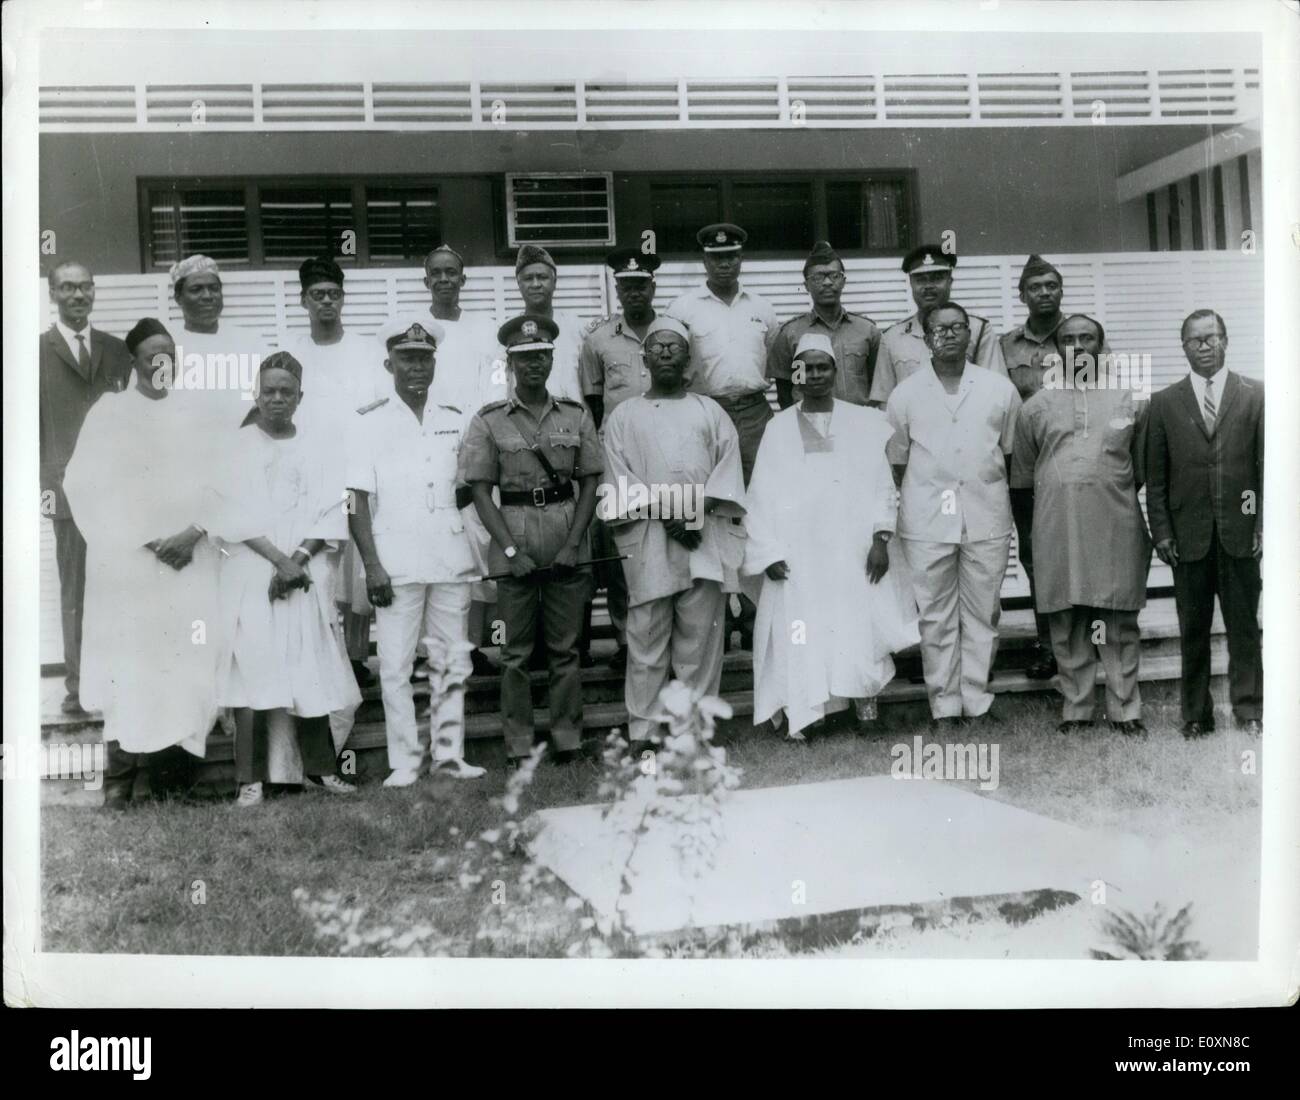 Jun. 06, 1967 - The Nigerian had of State, Major-General Yakubu Gowon on June 12th 1967 formed an Army-Civilian Federal Executive Council, In which are 16-man full-time cabinet for the Nigerian Federation. Members of the cabinets are known as ''commissioners''. Here members of the enlarged Federal Executive Council pose for a photograph with General Gowon after their inaugural in Lagos. Photo shows. Standing from the left to right: Front Row Alhaji Ali Monguno; Alhaji Aminu KAno; Commondore J.E.A Stock Photo